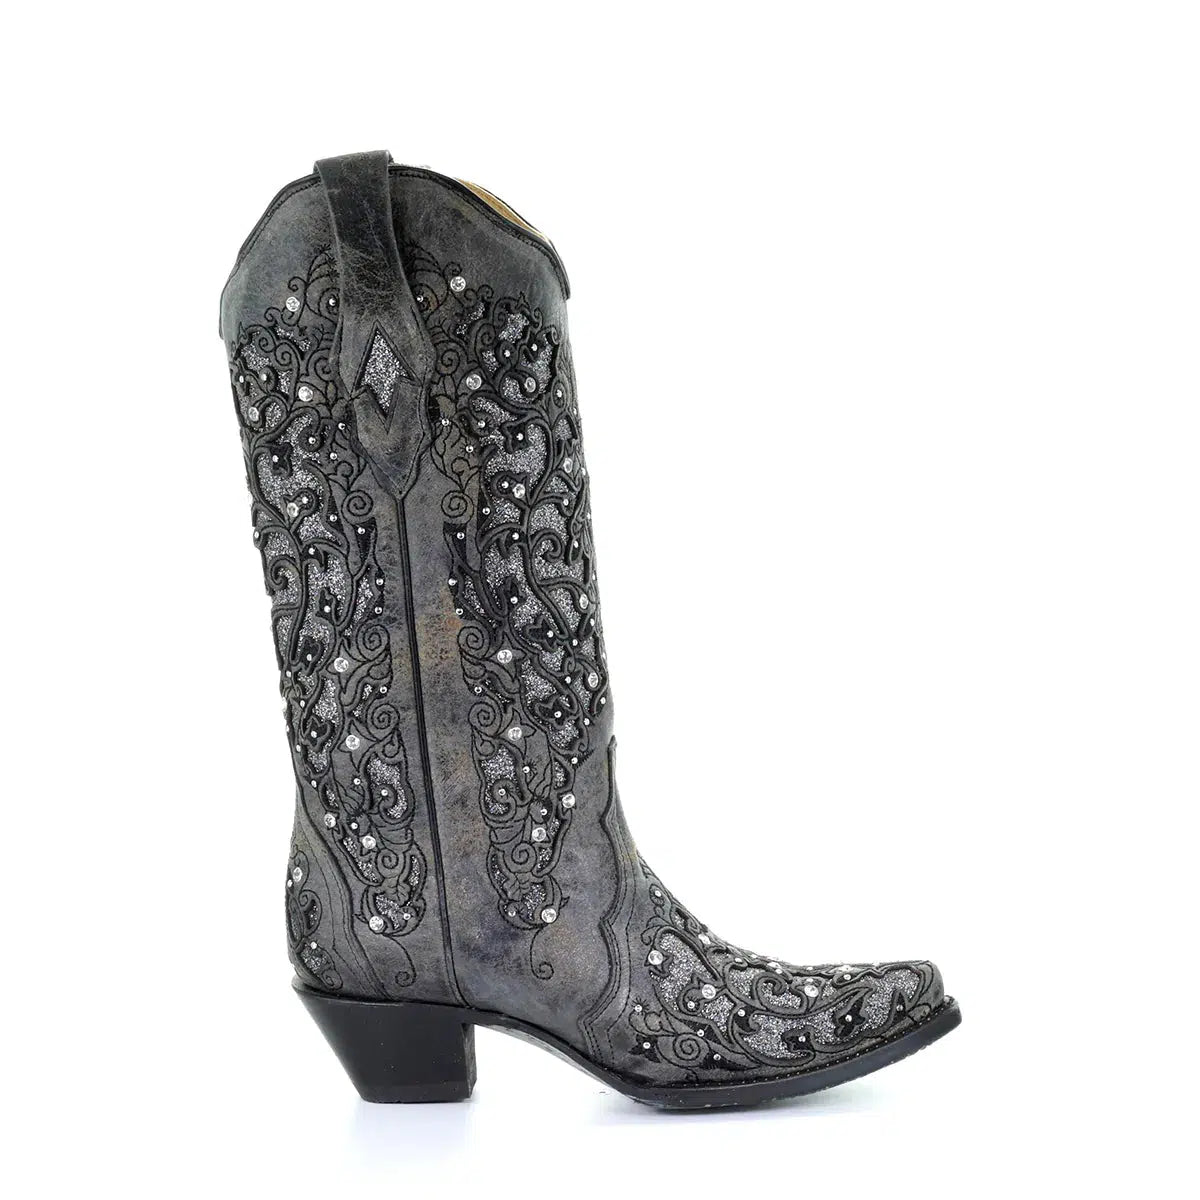 A3672 - Corral grey western cowgirl leather tall boots for women-Kuet.us